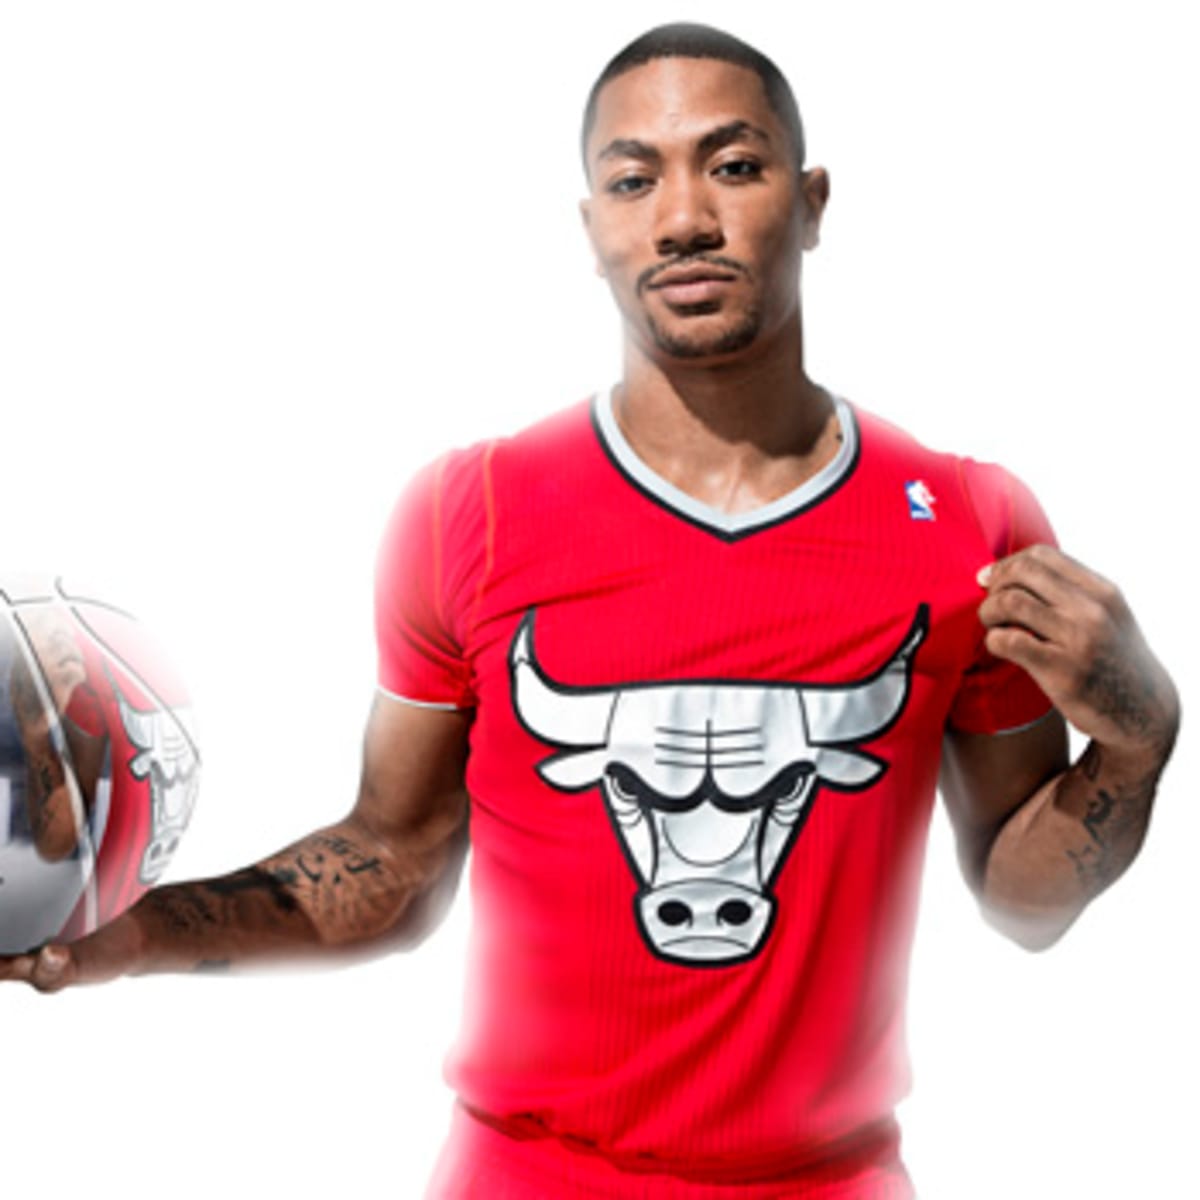 Yes, You Can Buy Those Short-Sleeve NBA Jerseys From the Christmas